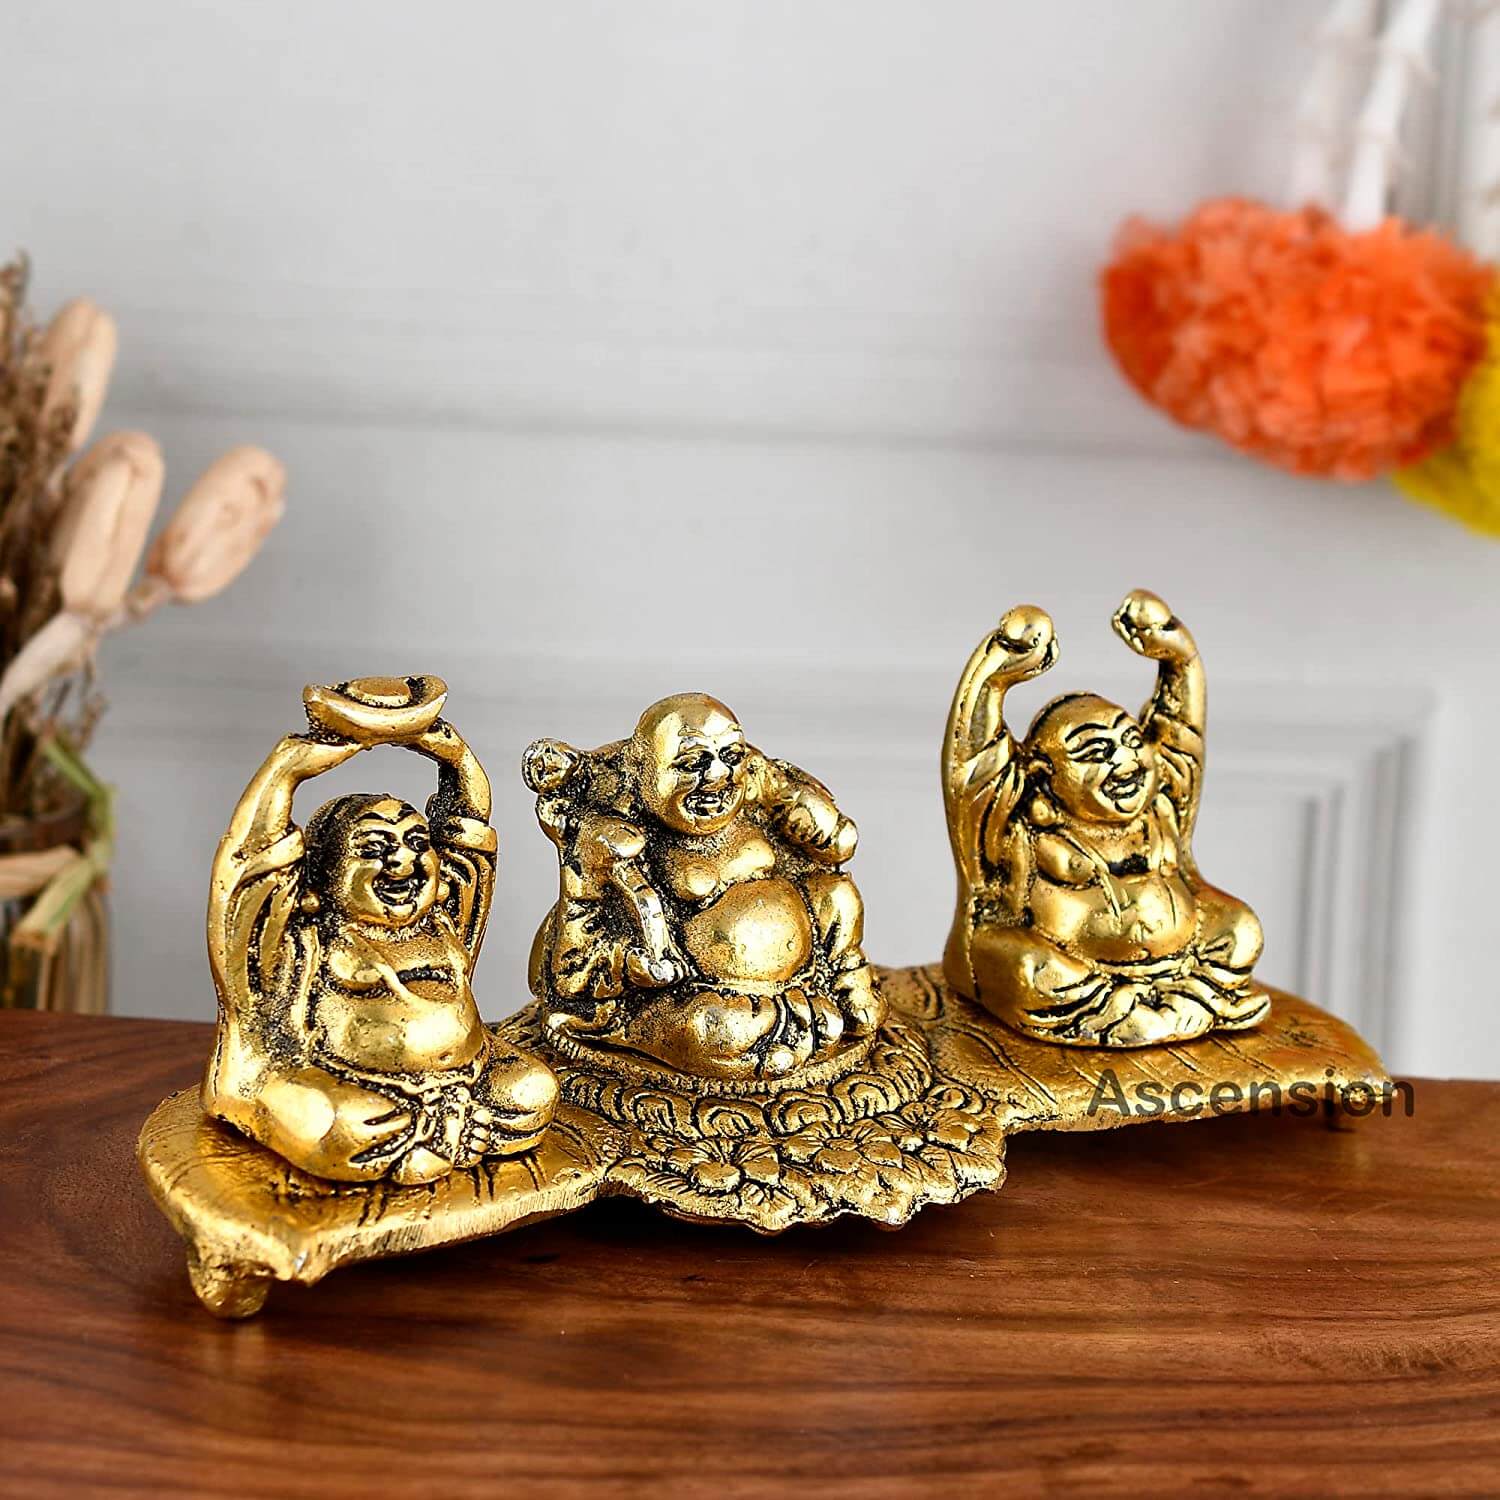 Buy Gift Gallery Earthenware Laughing Buddha For Home Decor 1 Pc Online at  the Best Price of Rs null - bigbasket